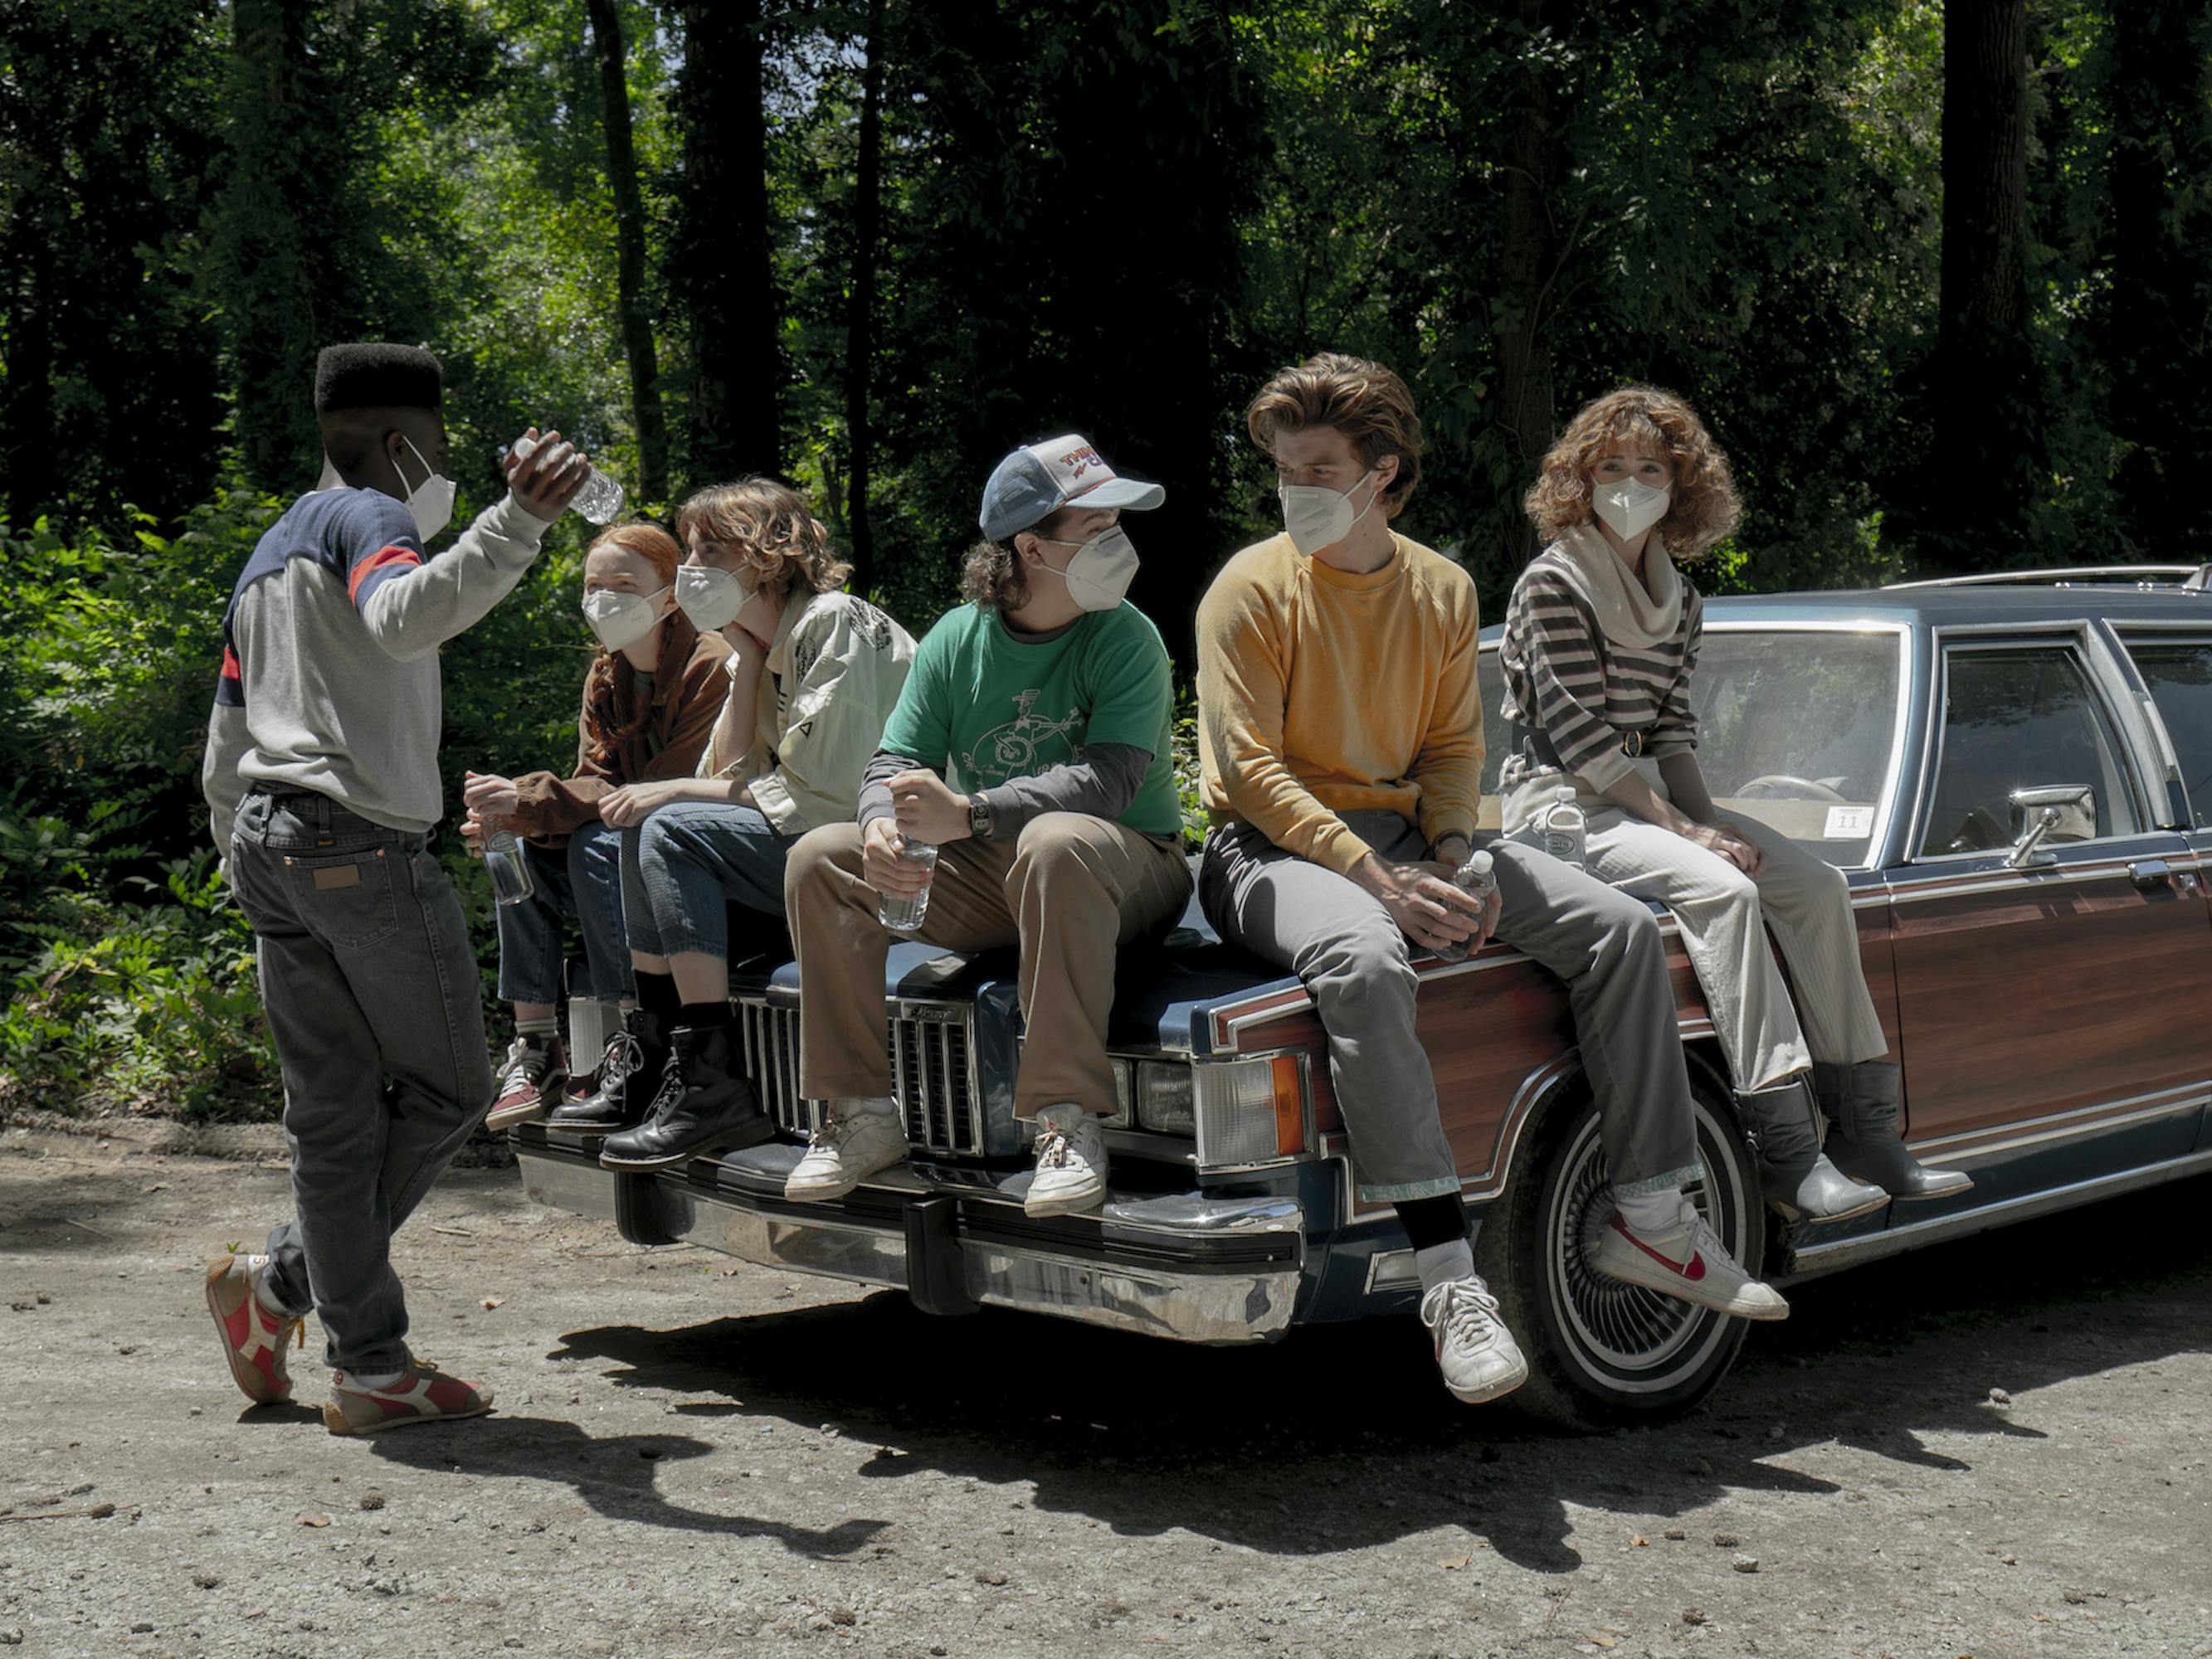 The cast of Stranger Things sit on a station wagon wearing masks in an outdoor sunny scene.